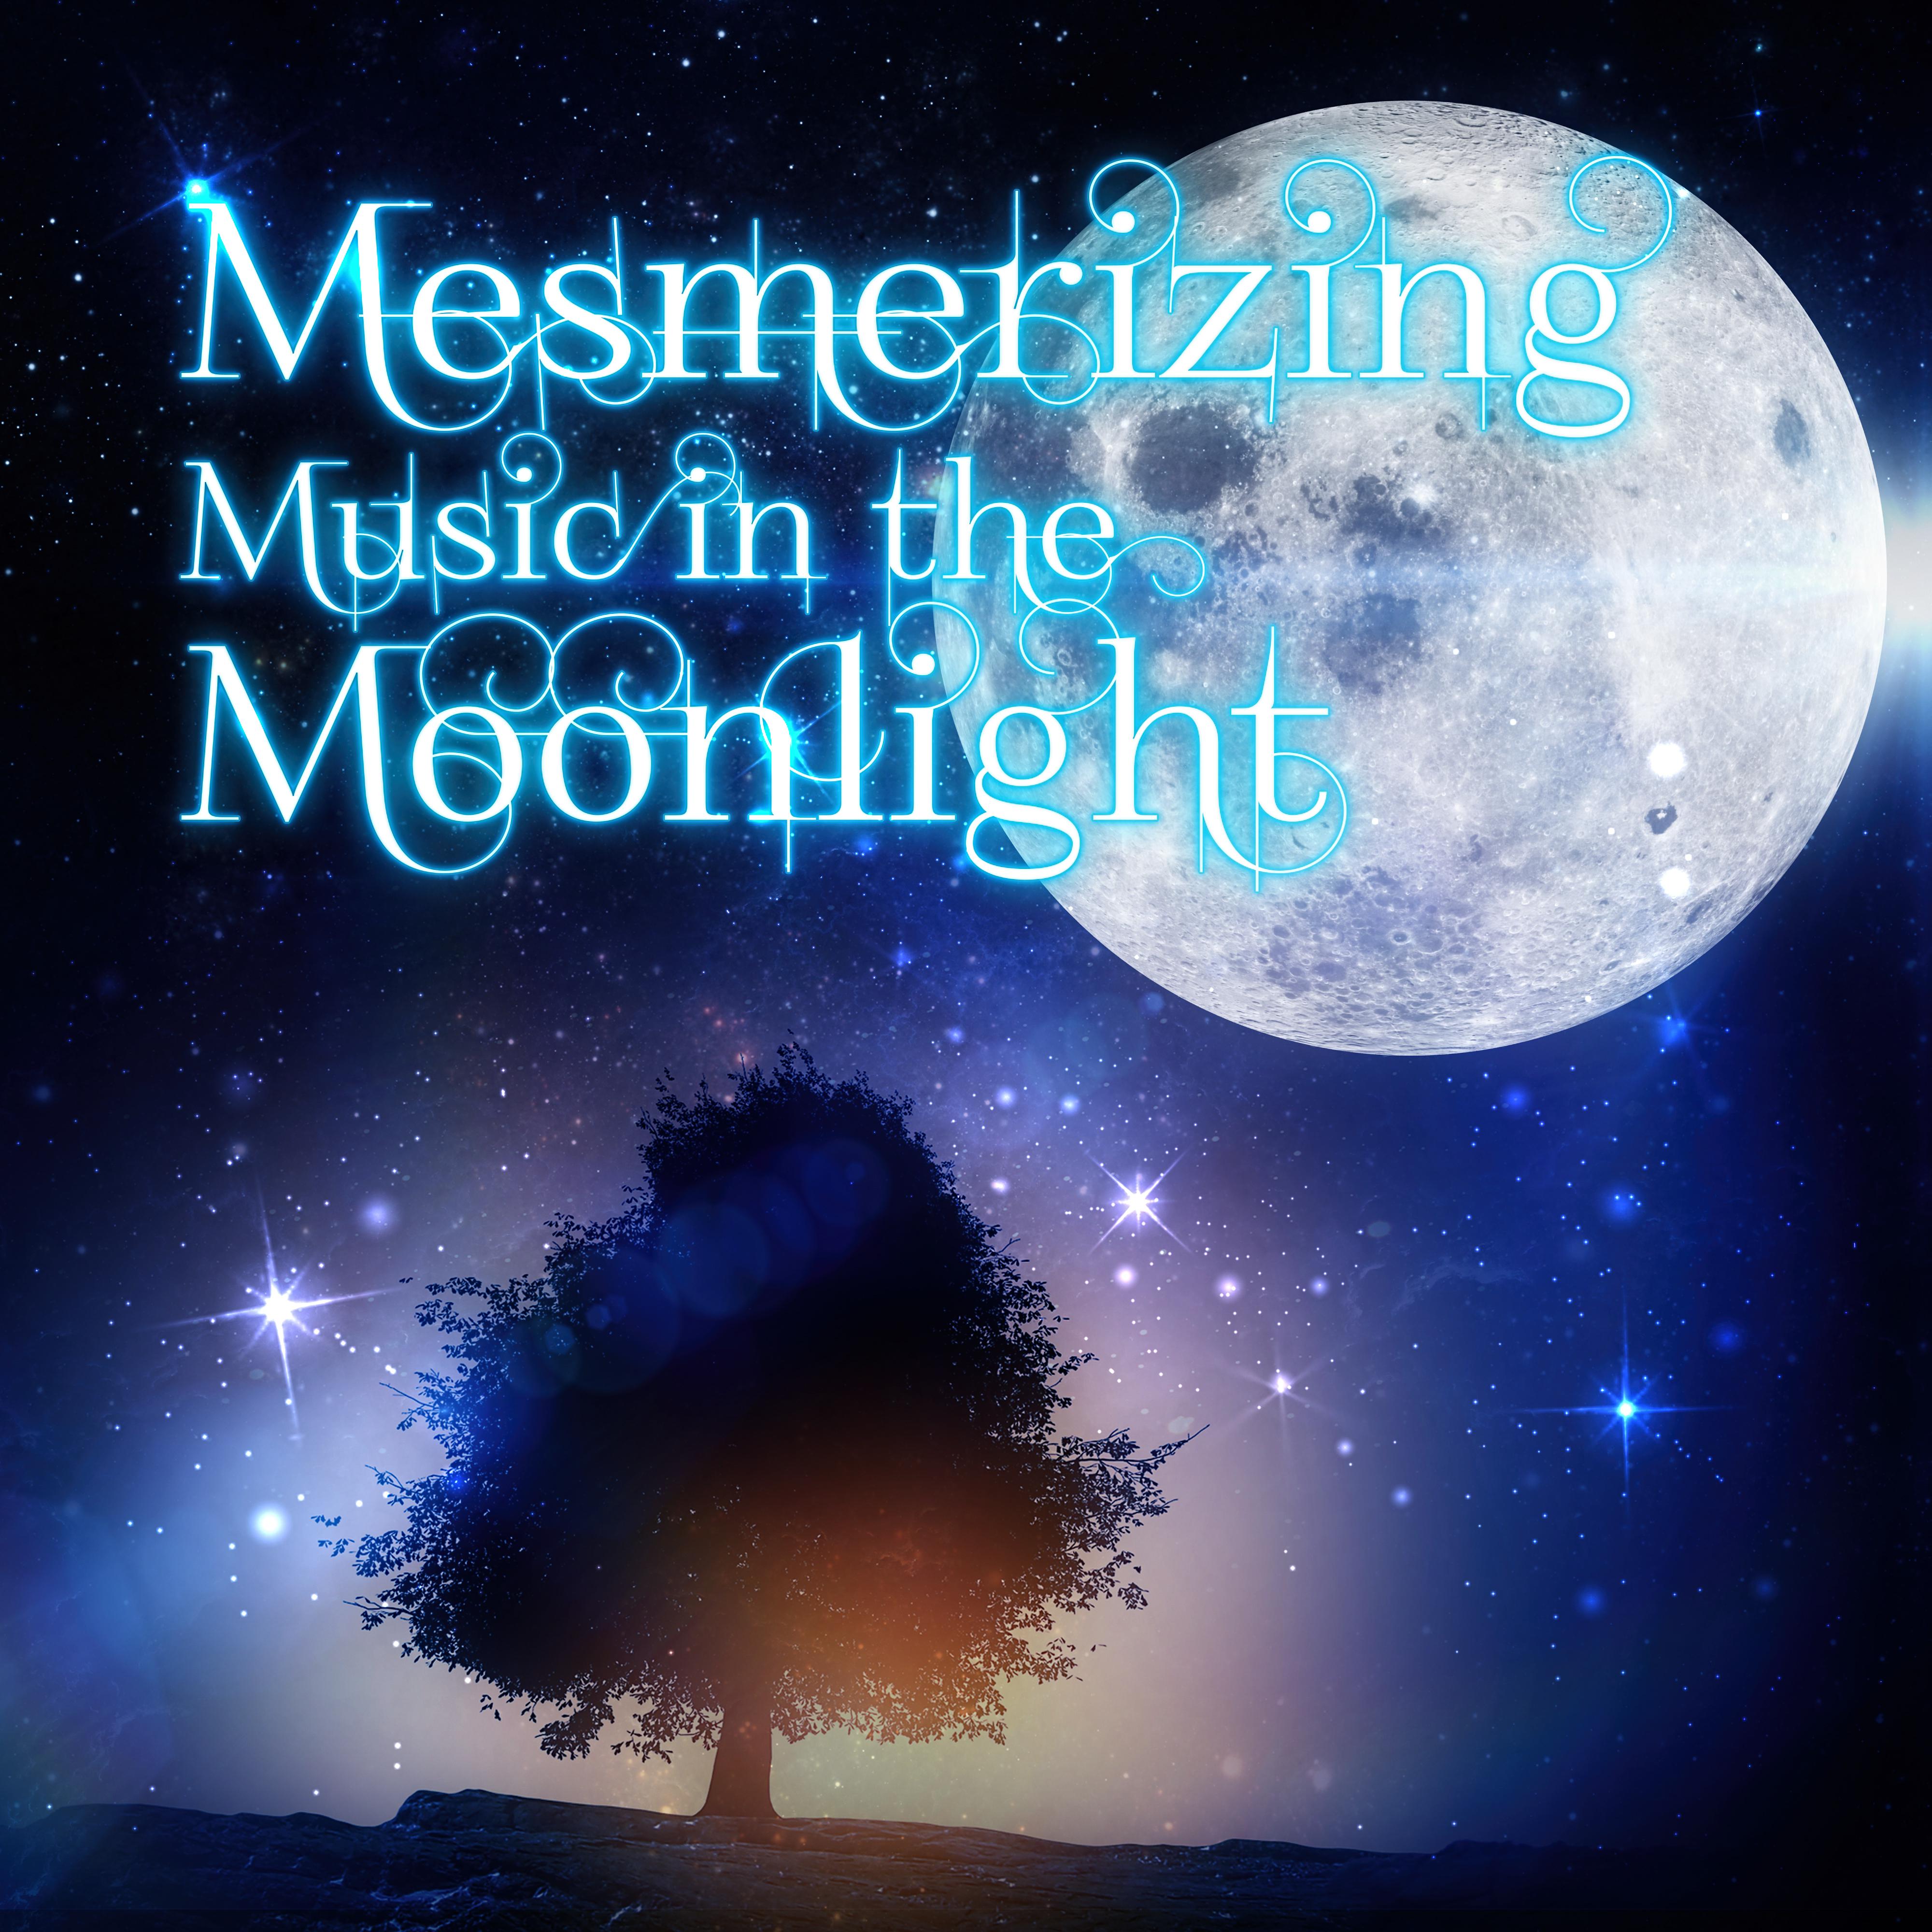 Mesmerizing Music in the Moonlight - The Best Music for Restful Sleep, Relaxing Background Music, Sweet Dreams, Inner Peace, Soothing Sounds & Beautiful Piano Music for Lounge, Stress Relief